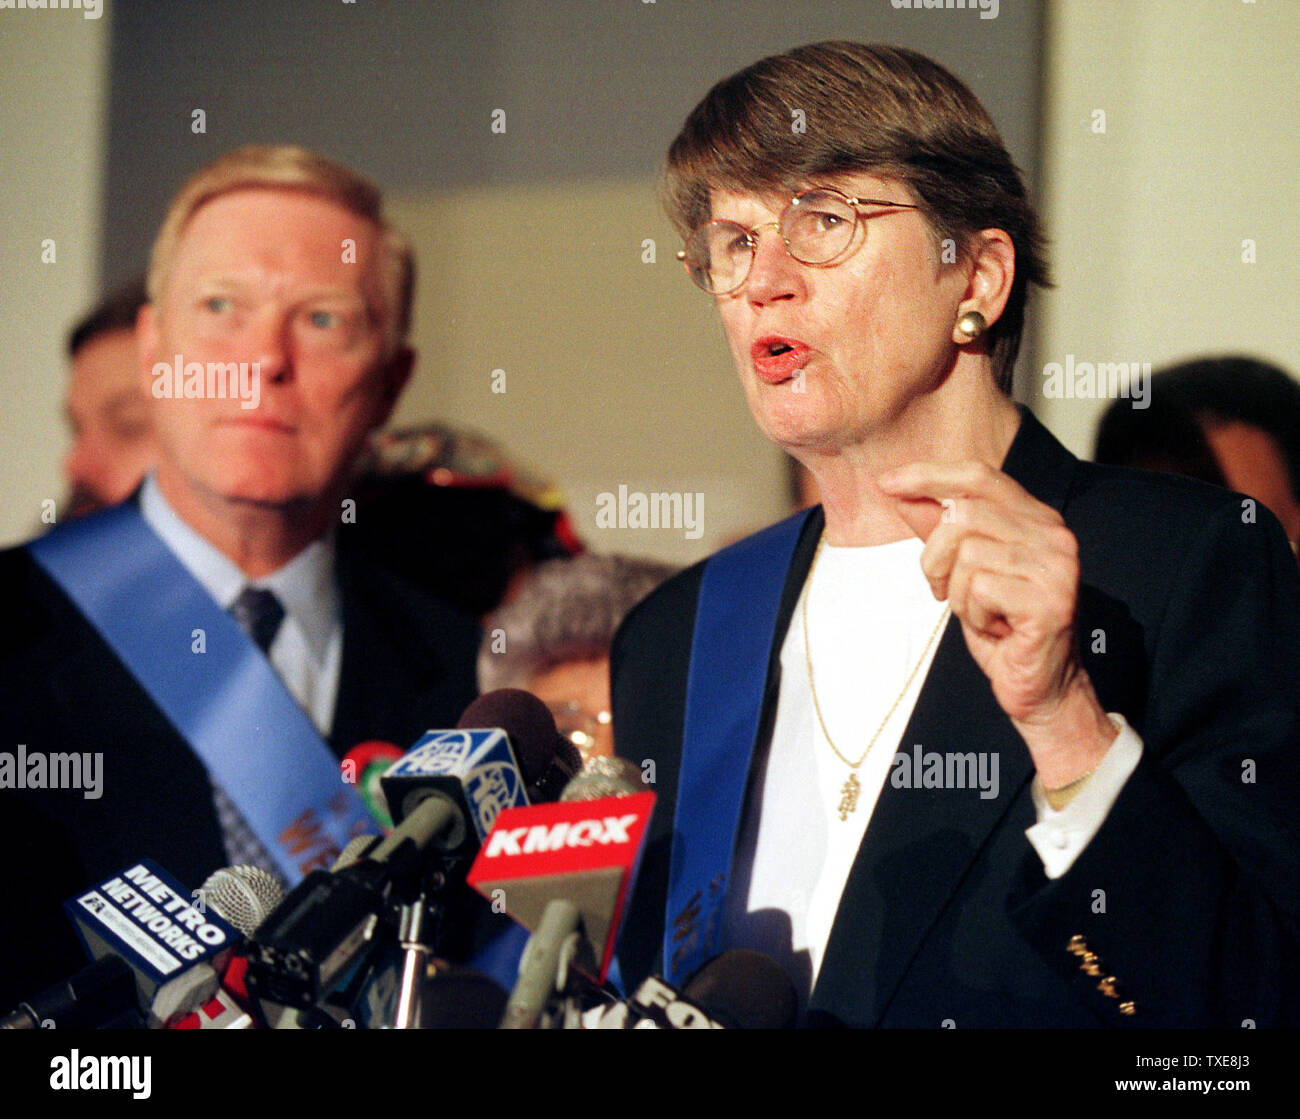 SLP2000011706 - 17 JANUARY 2000 - ST. LOUIS, MISSOURI, USA:  U.S. Congressman Richard Gephardt (D-MO), left, listens to remarks made by U. S. Attorney General Janet Reno while speaking in the rotunda of the Old Courthouse in downtown St. Louis, during a celebration of the life of Dr. Martin Luther King, Jr., January 17.   jr/bg/Bill Greenblatt       UPI Stock Photo